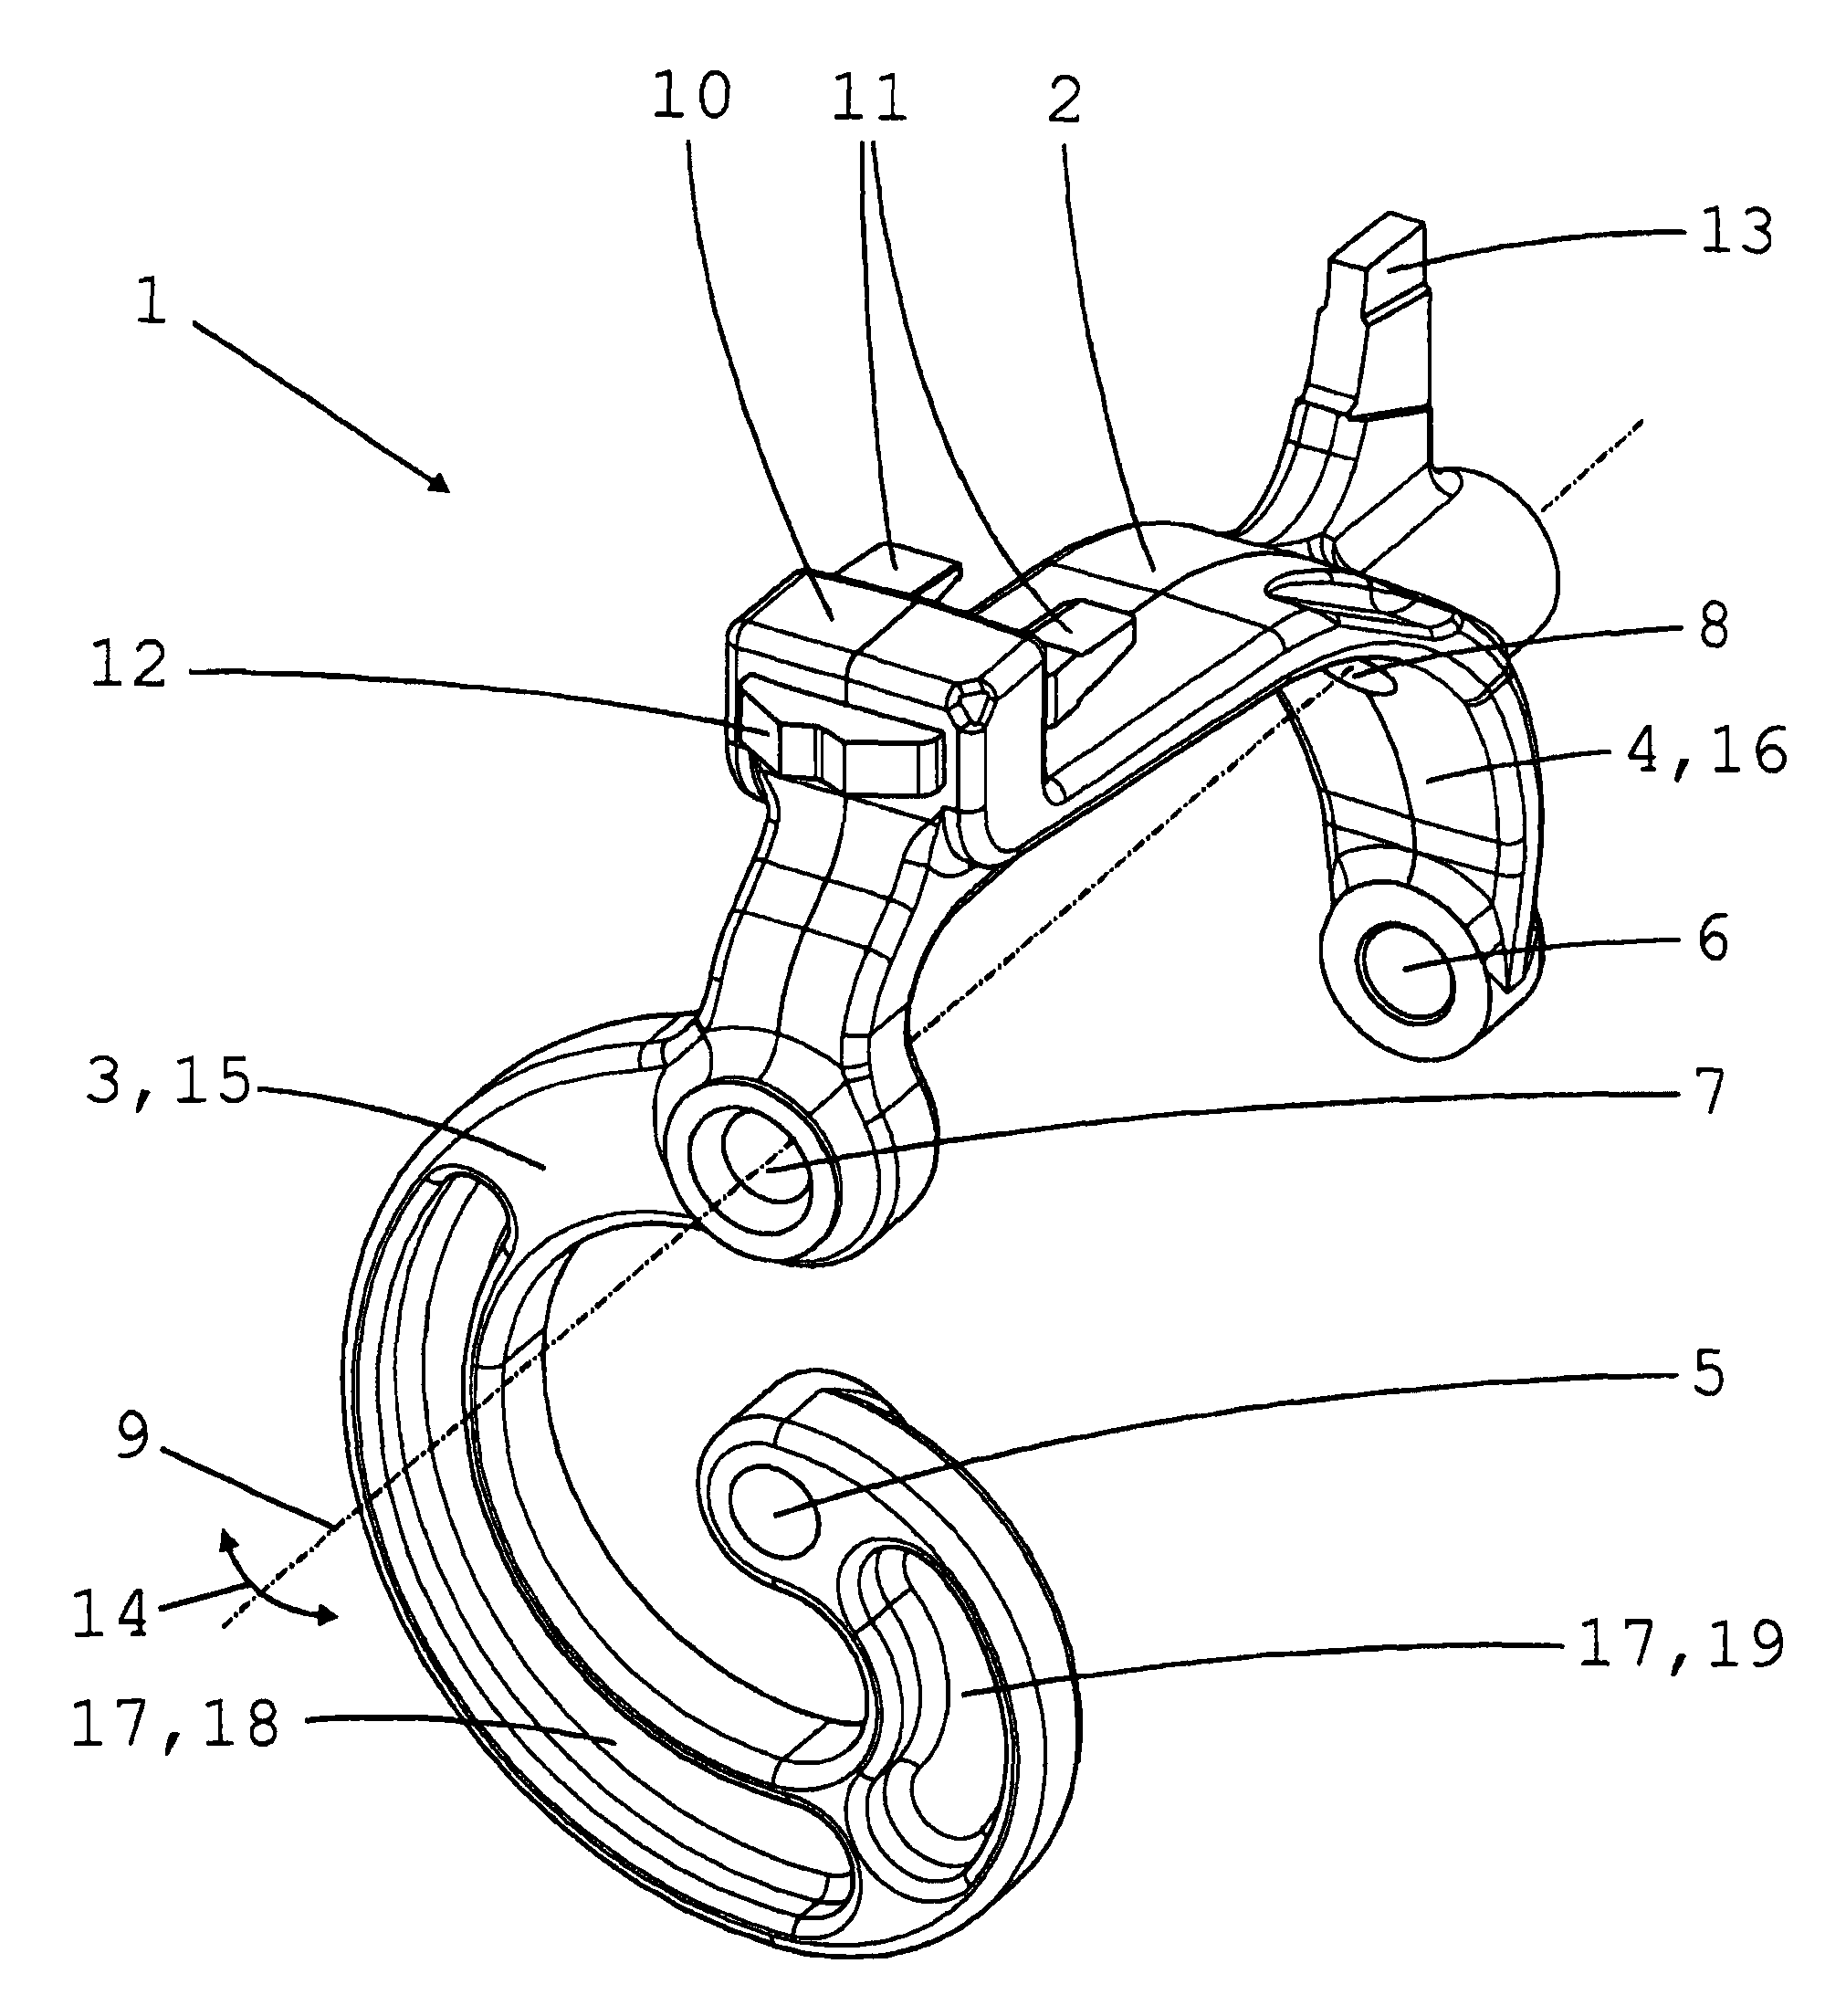 Shifting device for a manual transmission